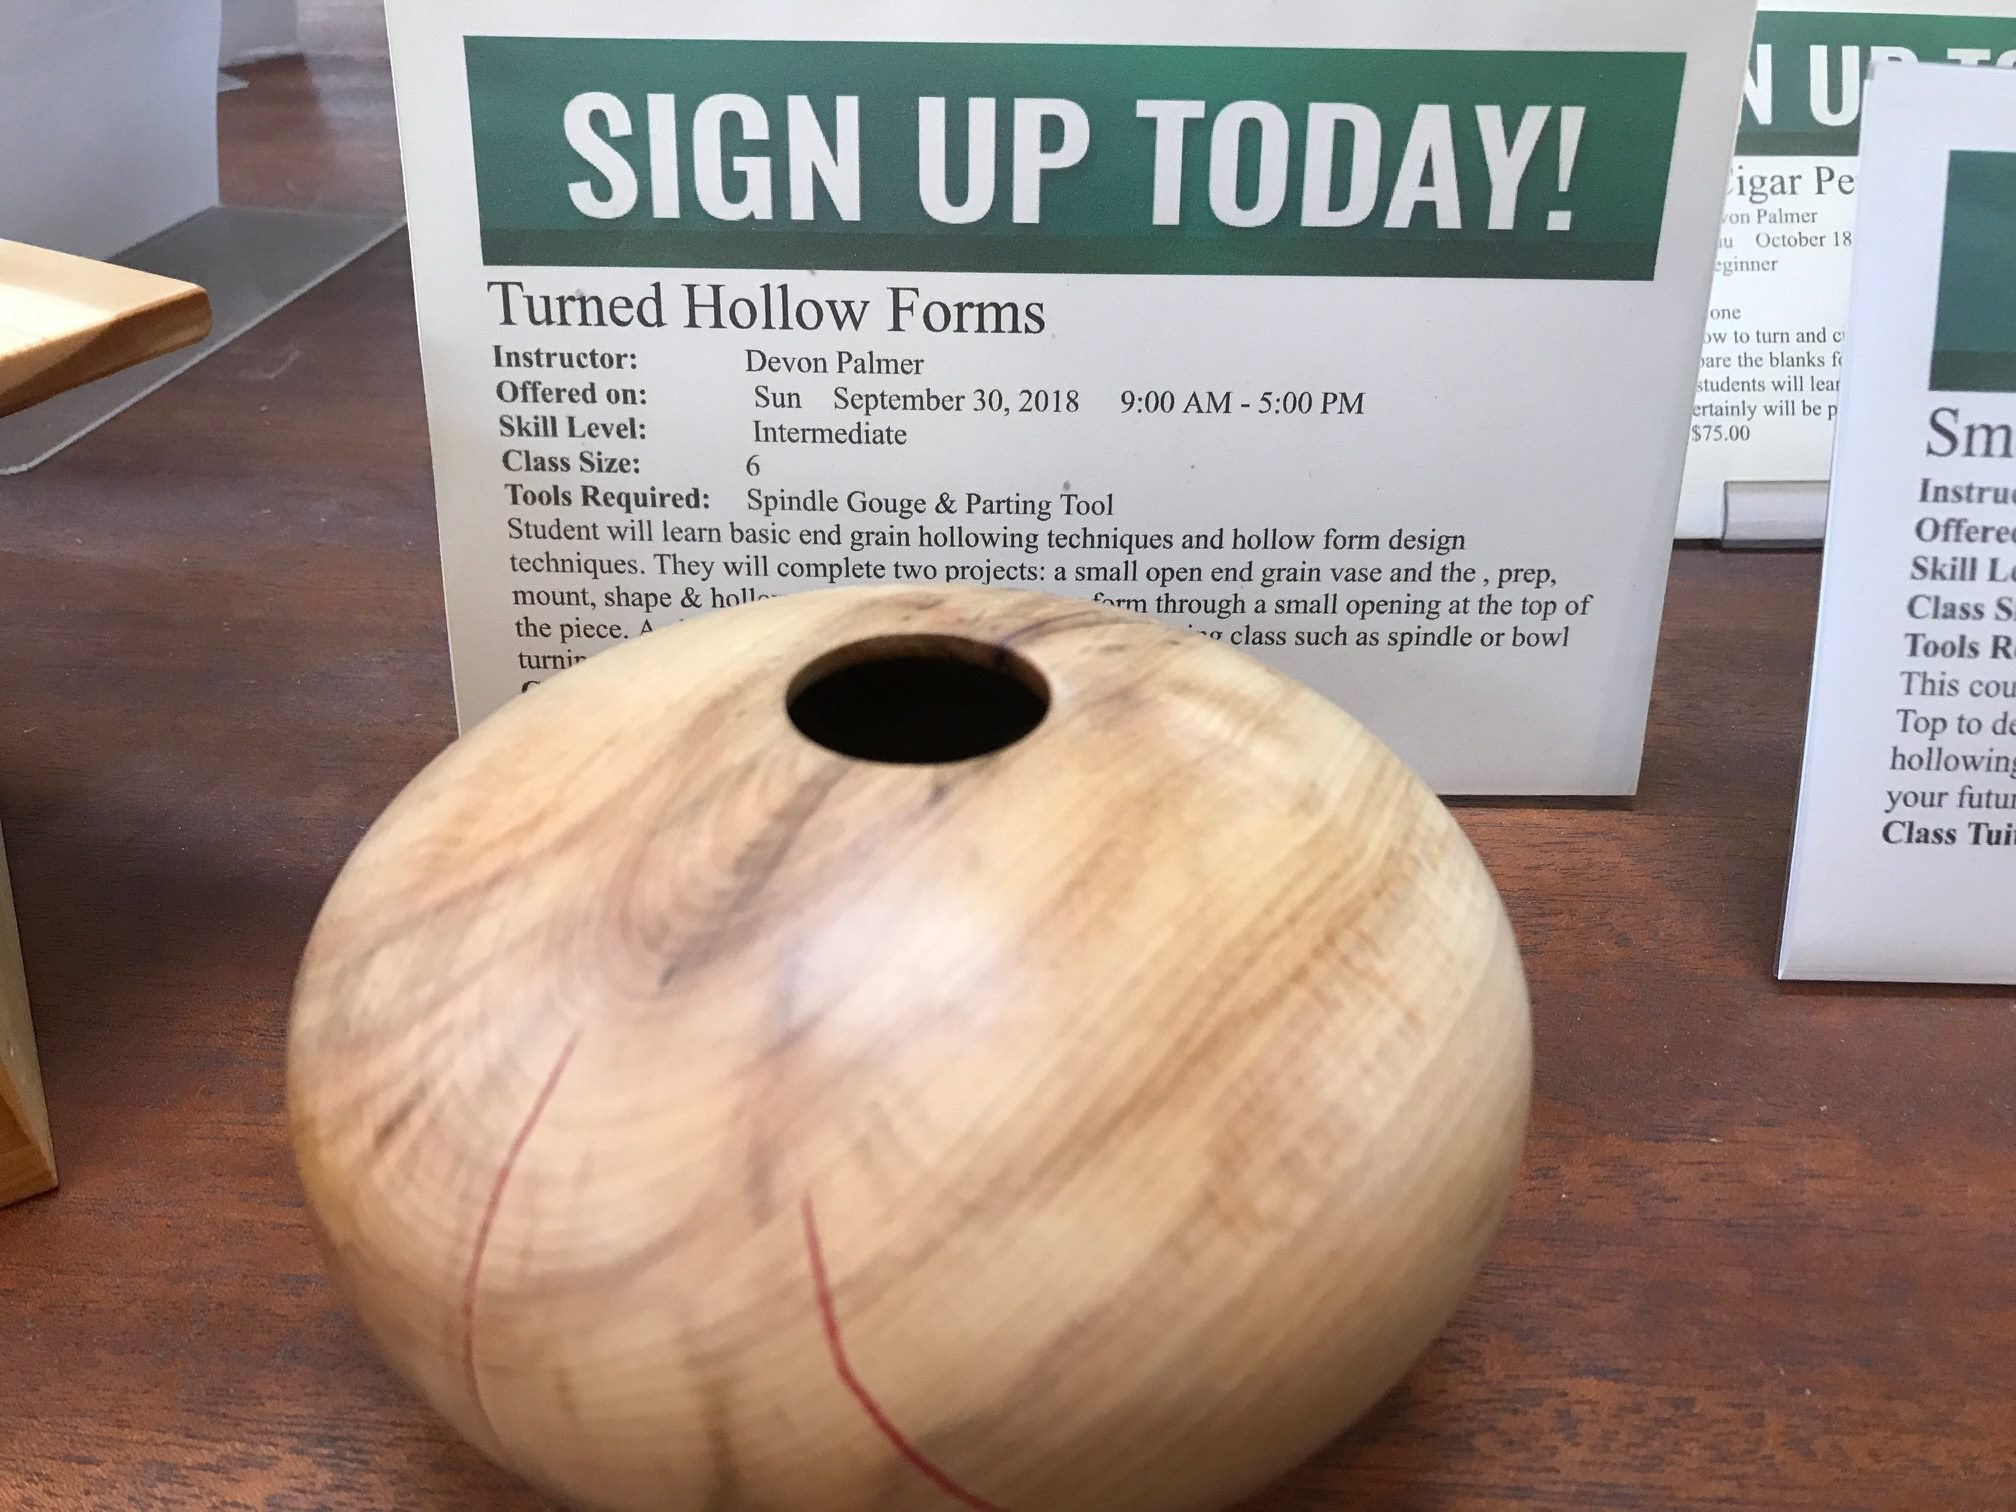 24 attractive Wood Turned Vase 2024 free download wood turned vase of turned hollow forms with devon palmer woodcraft of columbus oh inside turned hollow forms with devon palmer woodcraft of columbus oh columbus 30 september